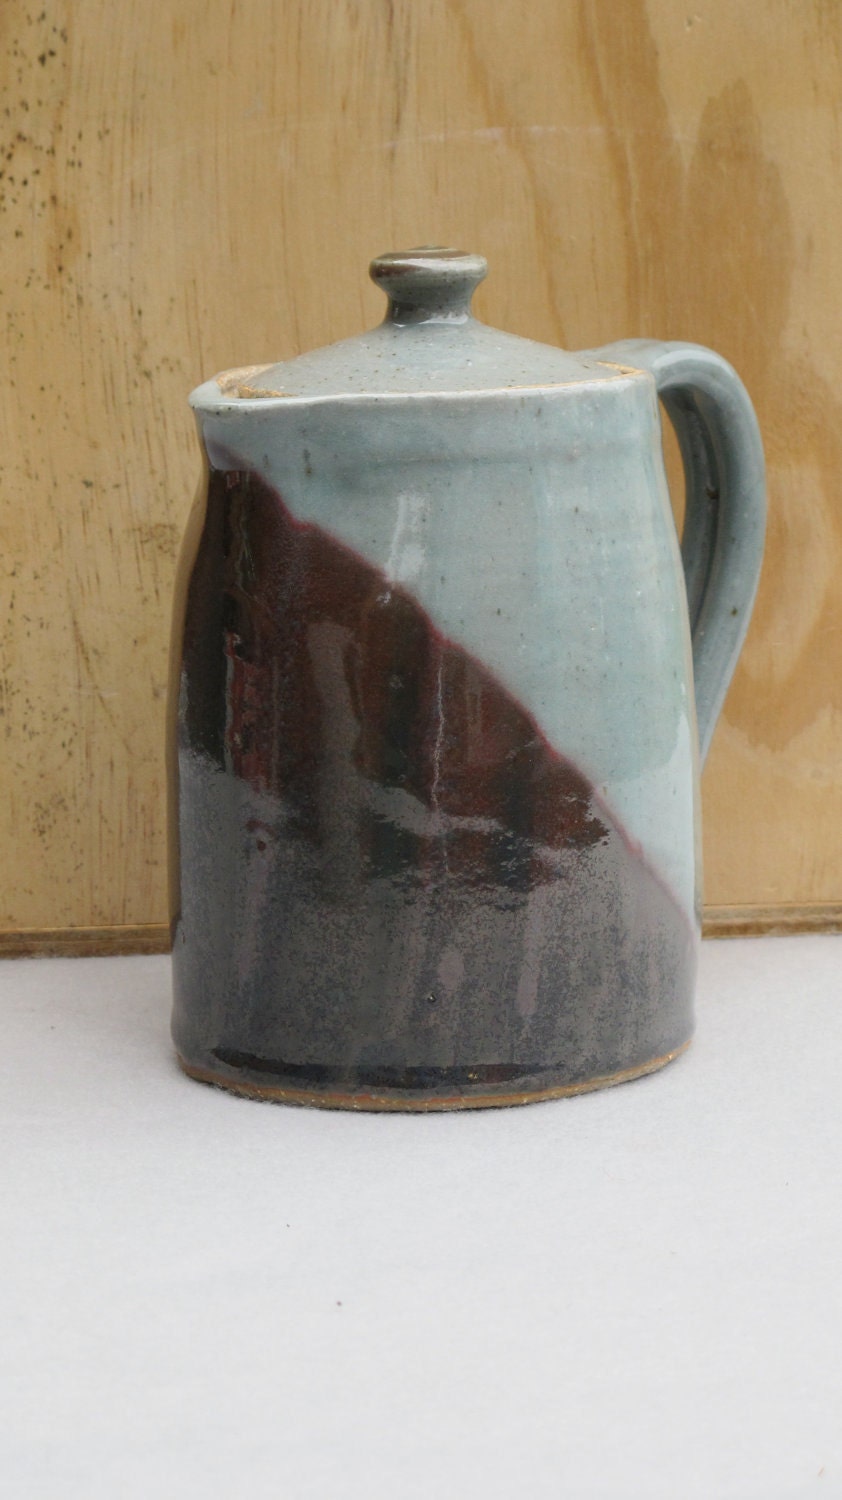 Pitcher or Coffee Server with lid - NewProspectPottery